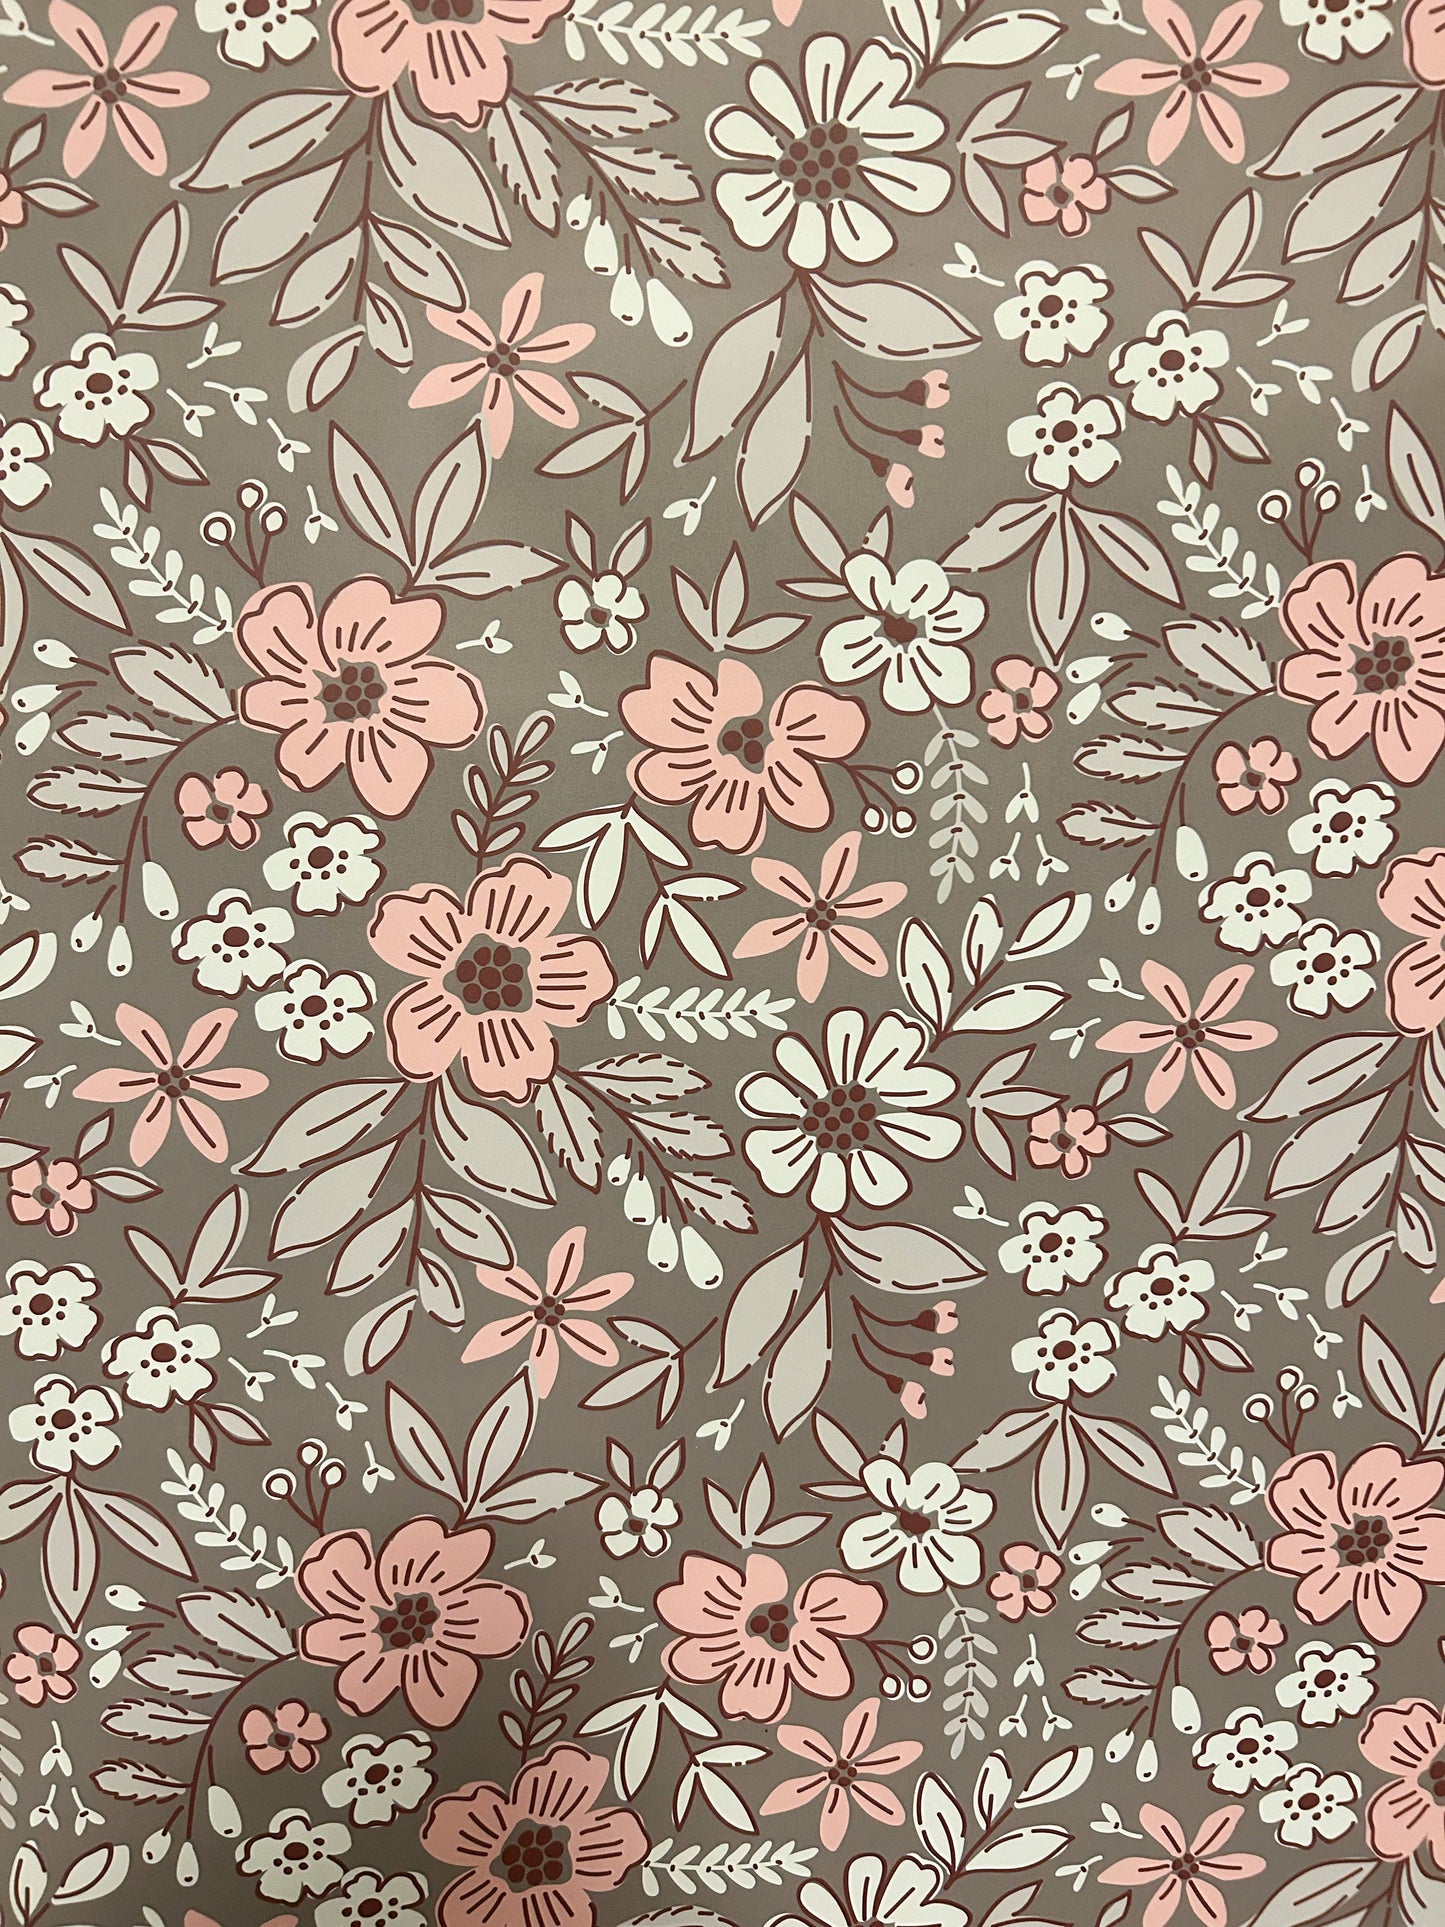 Blushing Blossoms - Peel and Stick Wallpaper